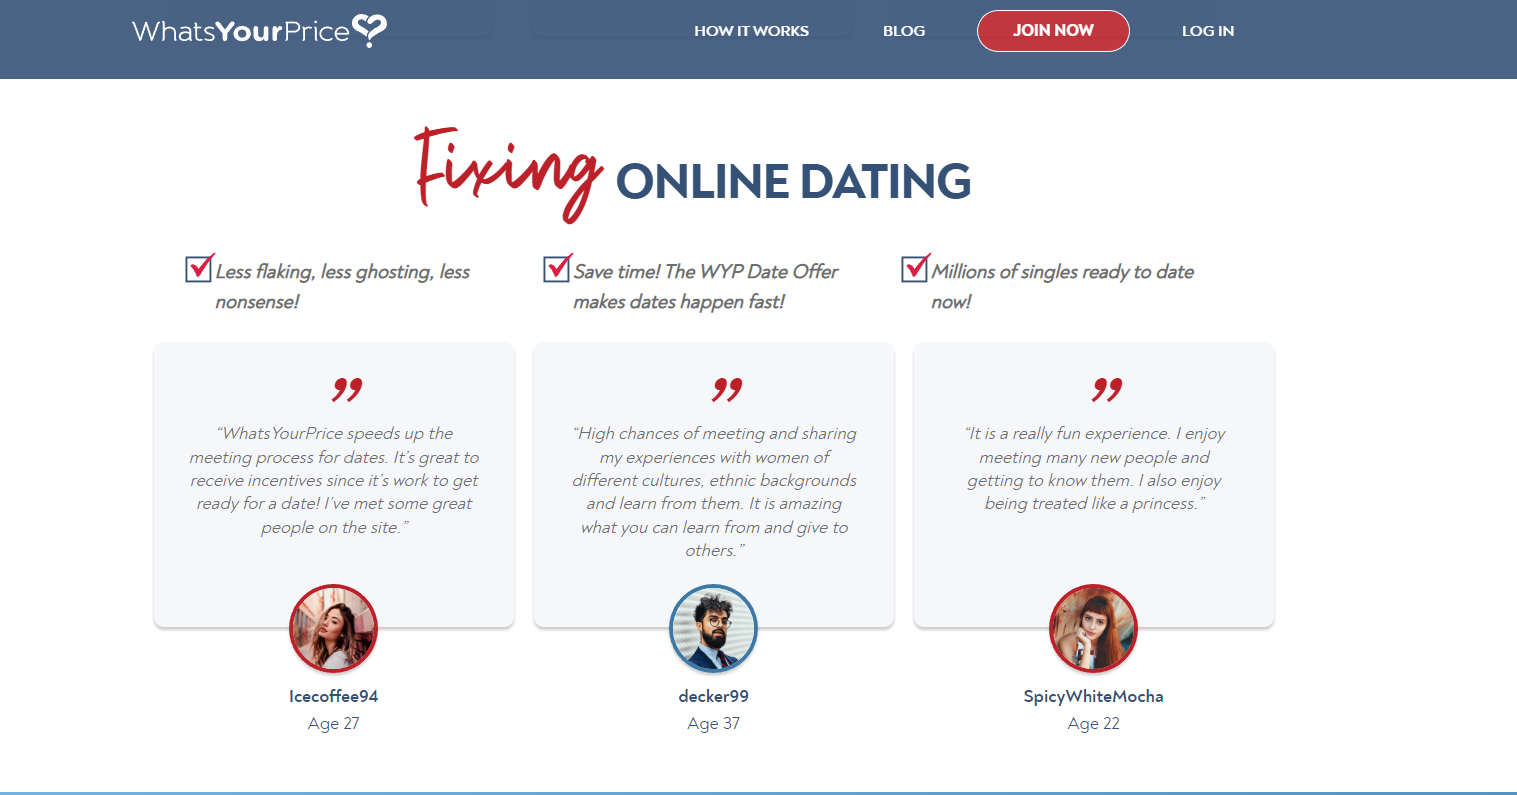 Free dating sites without payment